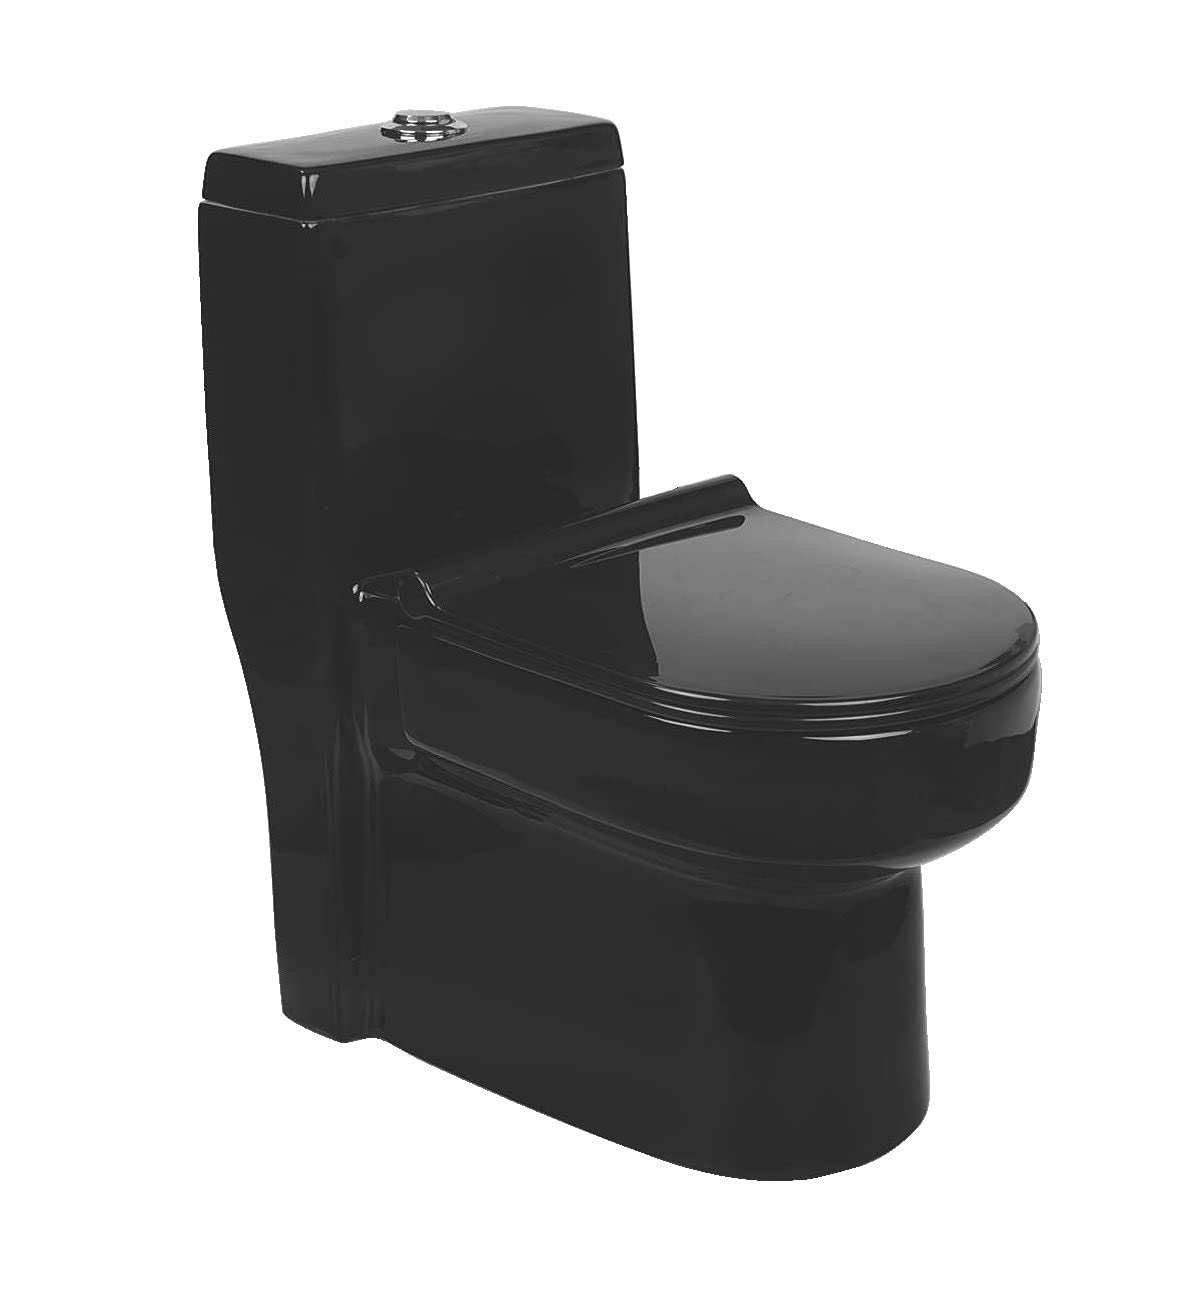 InArt Ceramic One Piece Western Toilet Commode - European Commode Water Closet With Soft Close Seat Cover S Trap Black Glossy - InArt-Studio